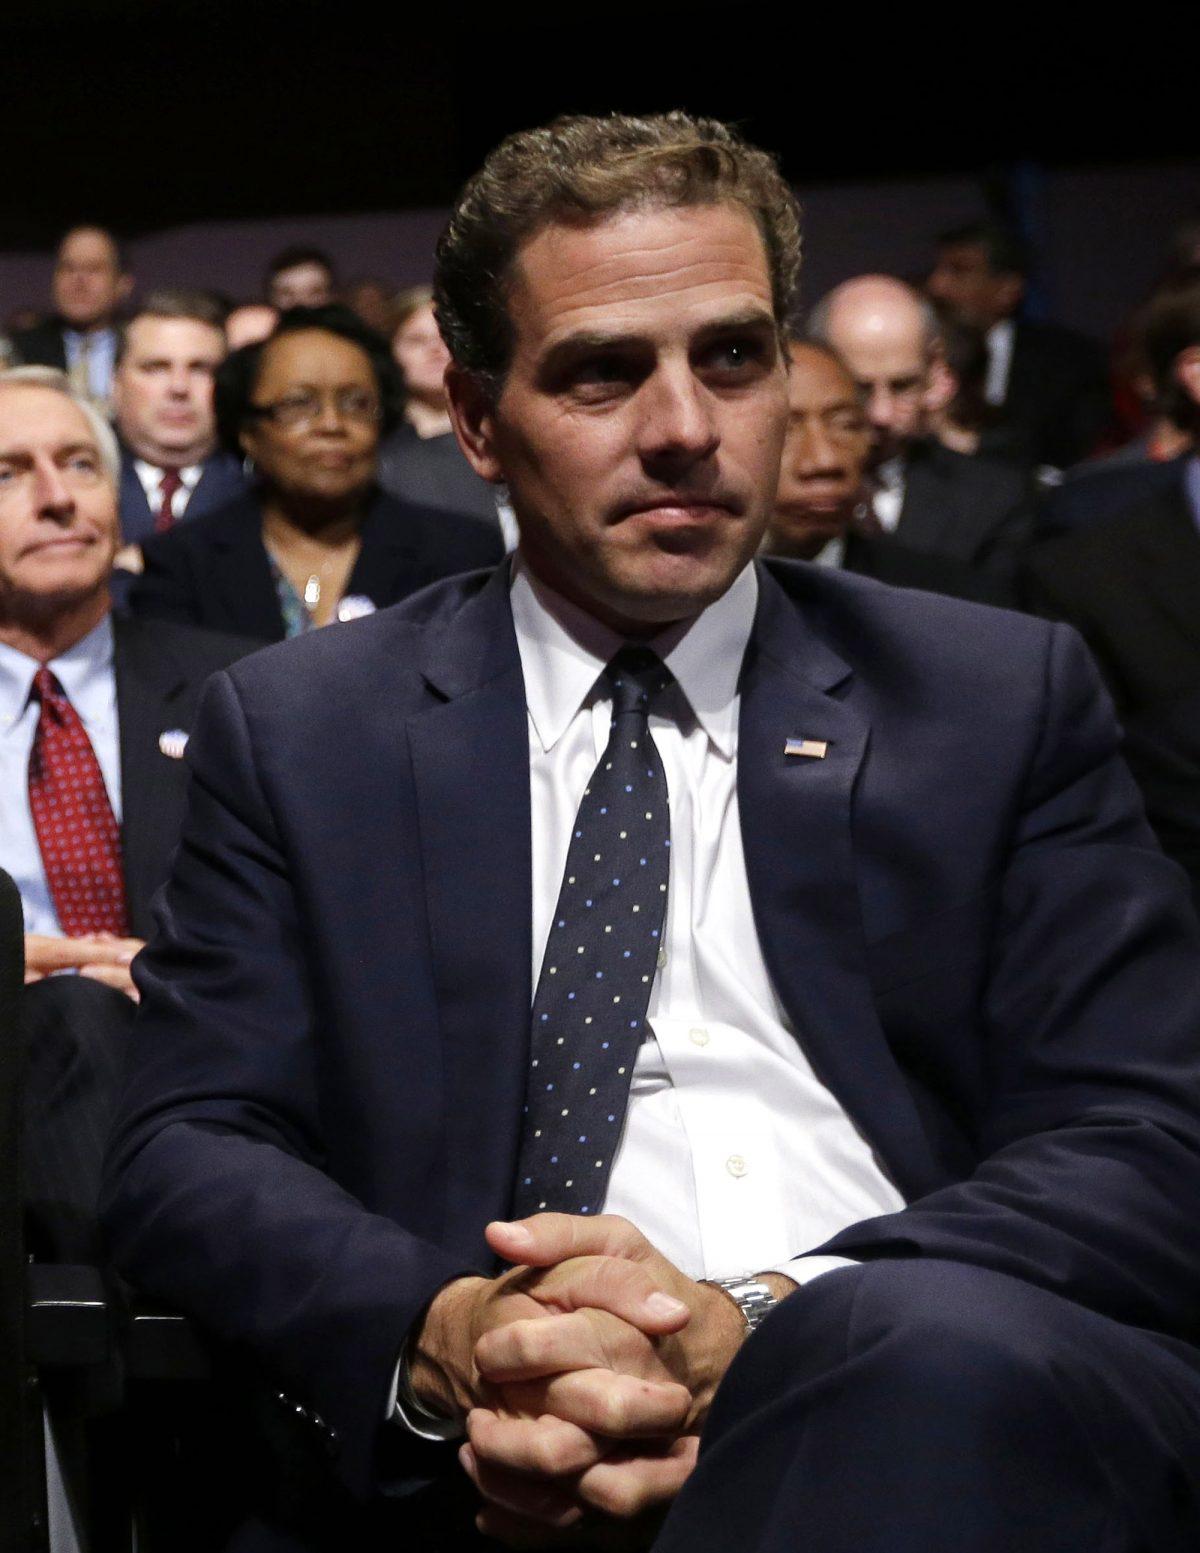 Hunter Biden waits for the start of the his father's, Vice President Joe Biden's, debate at Centre College in Danville, Ky., on Oct. 11, 2012. (Pablo Martinez Monsivais/AP Photo)